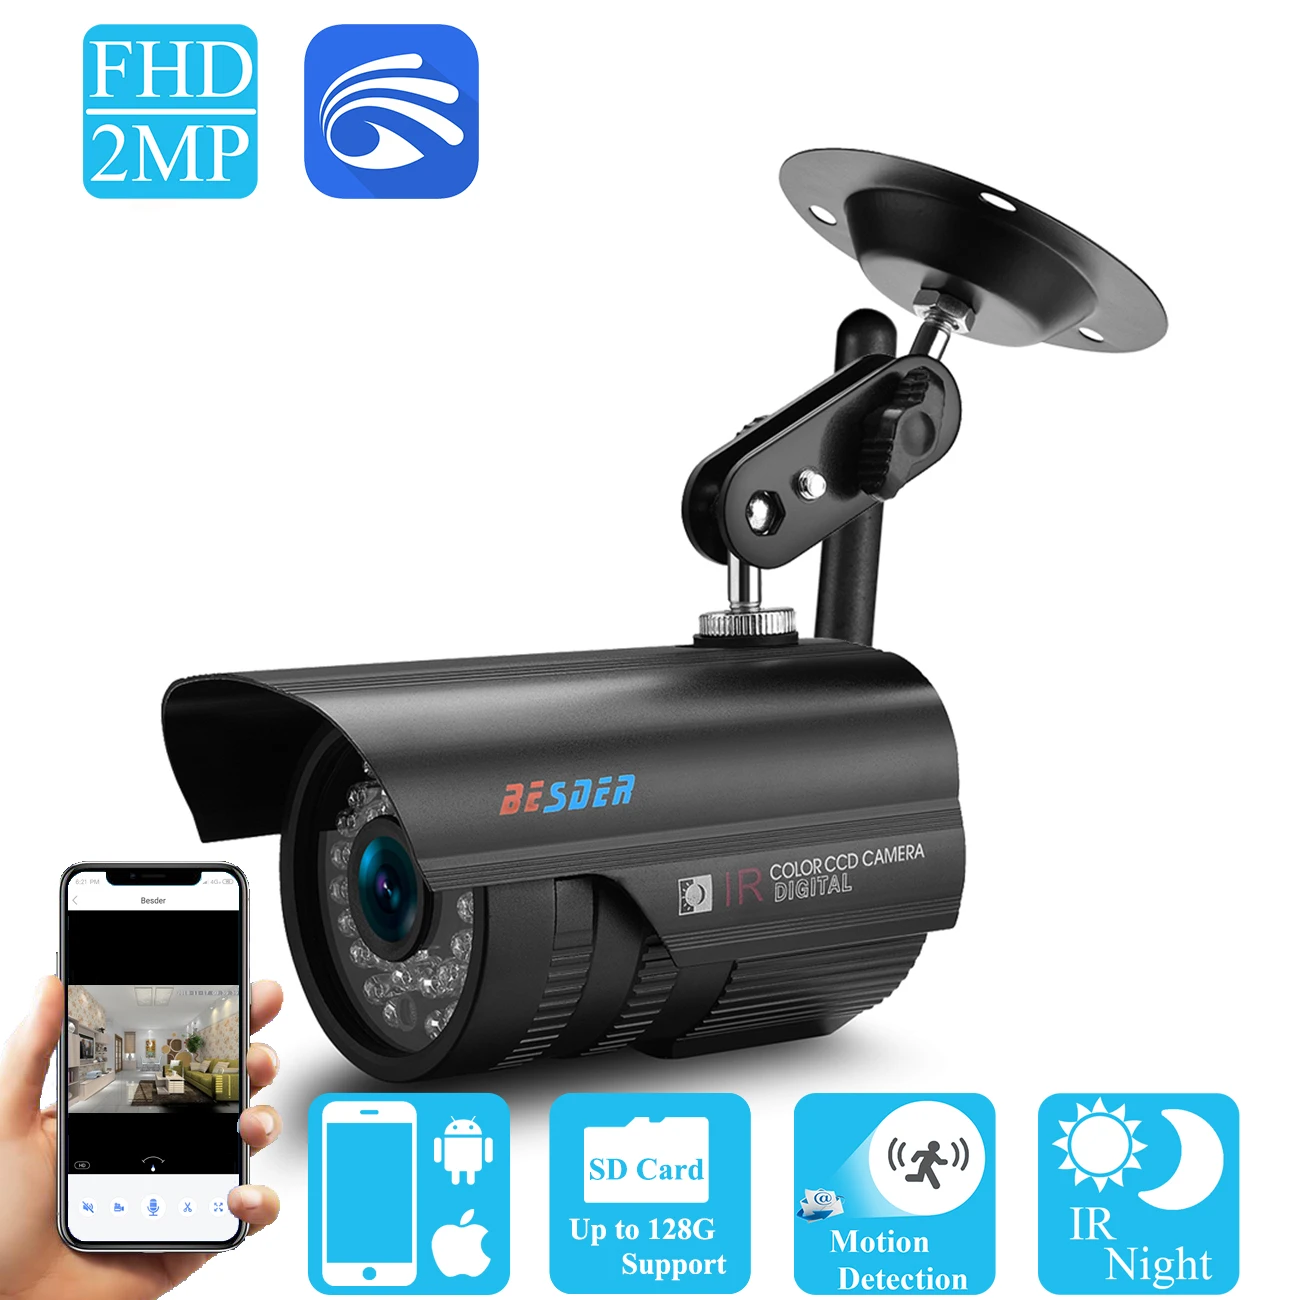 

BESDER Yoosee Wifi 720P/960P/1080P Ip Camera Bullet Outdoor Street Wireless Wired CCTV Ip Surveillance Camera Support SD Card